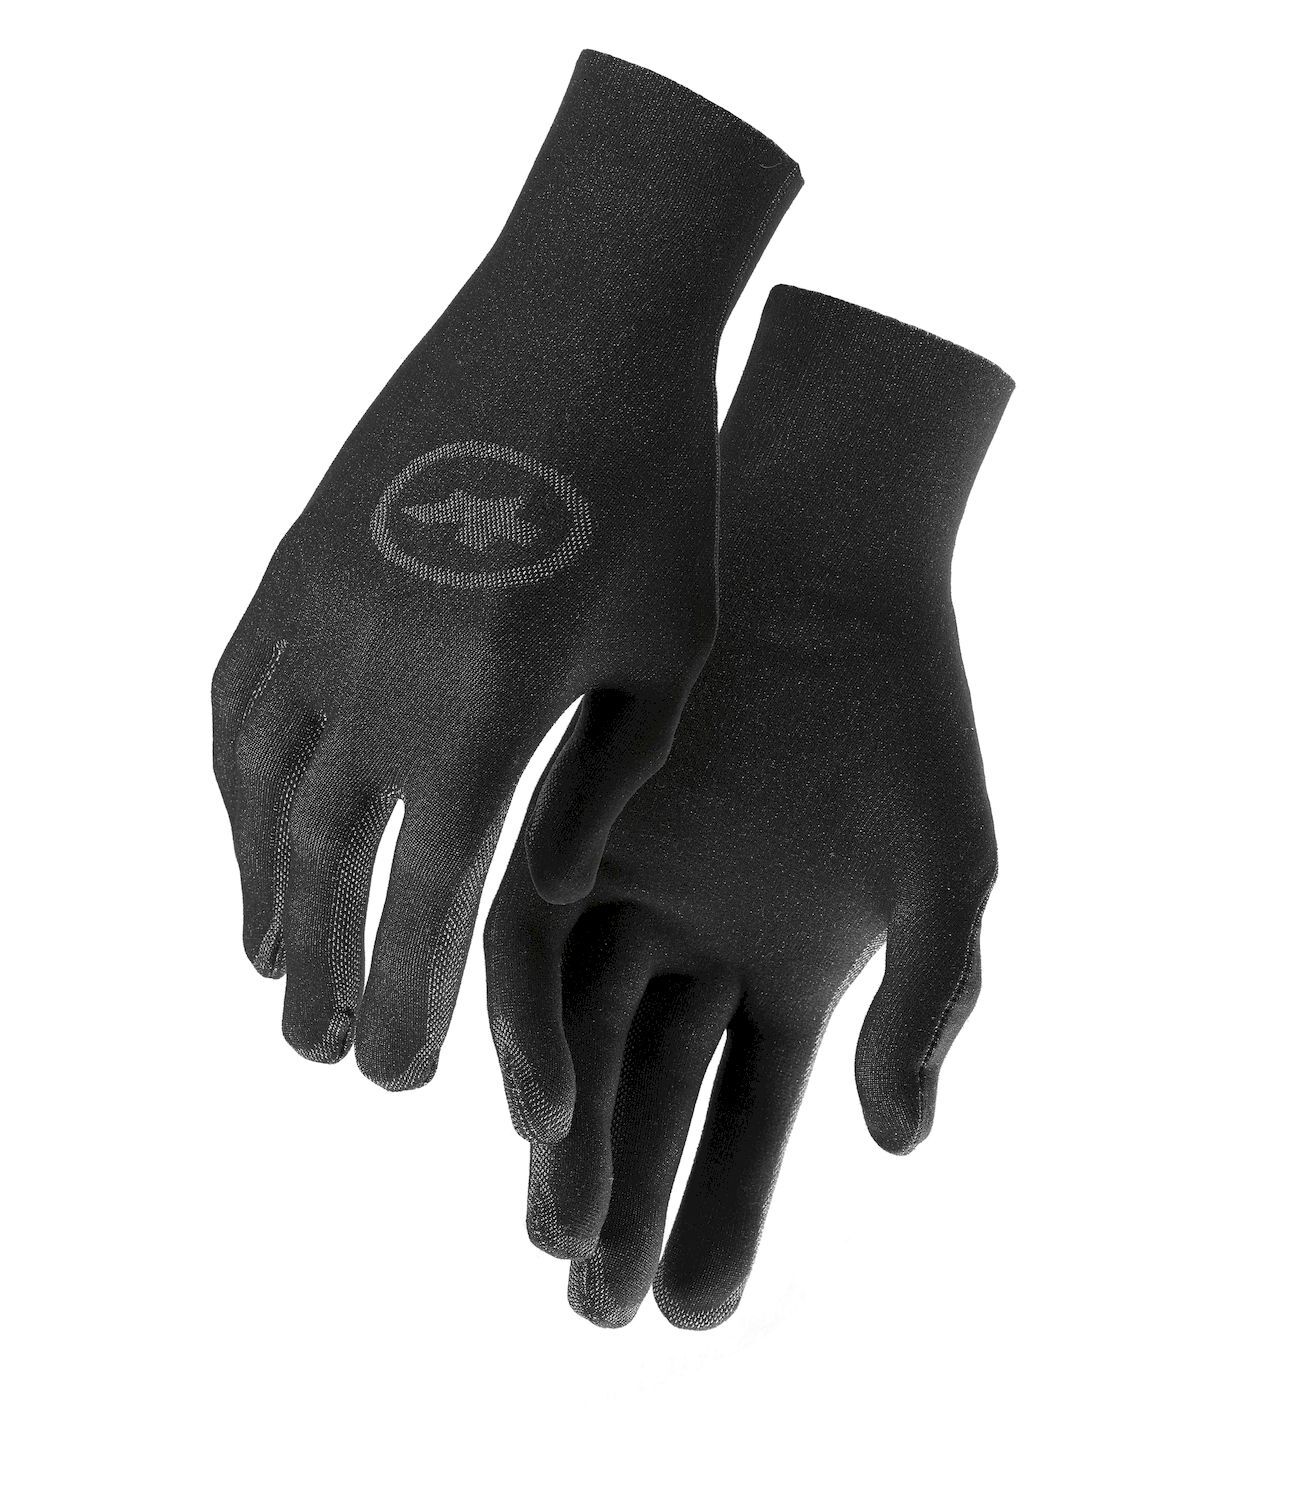 Assos Spring Fall Liner Gloves - Cycling gloves